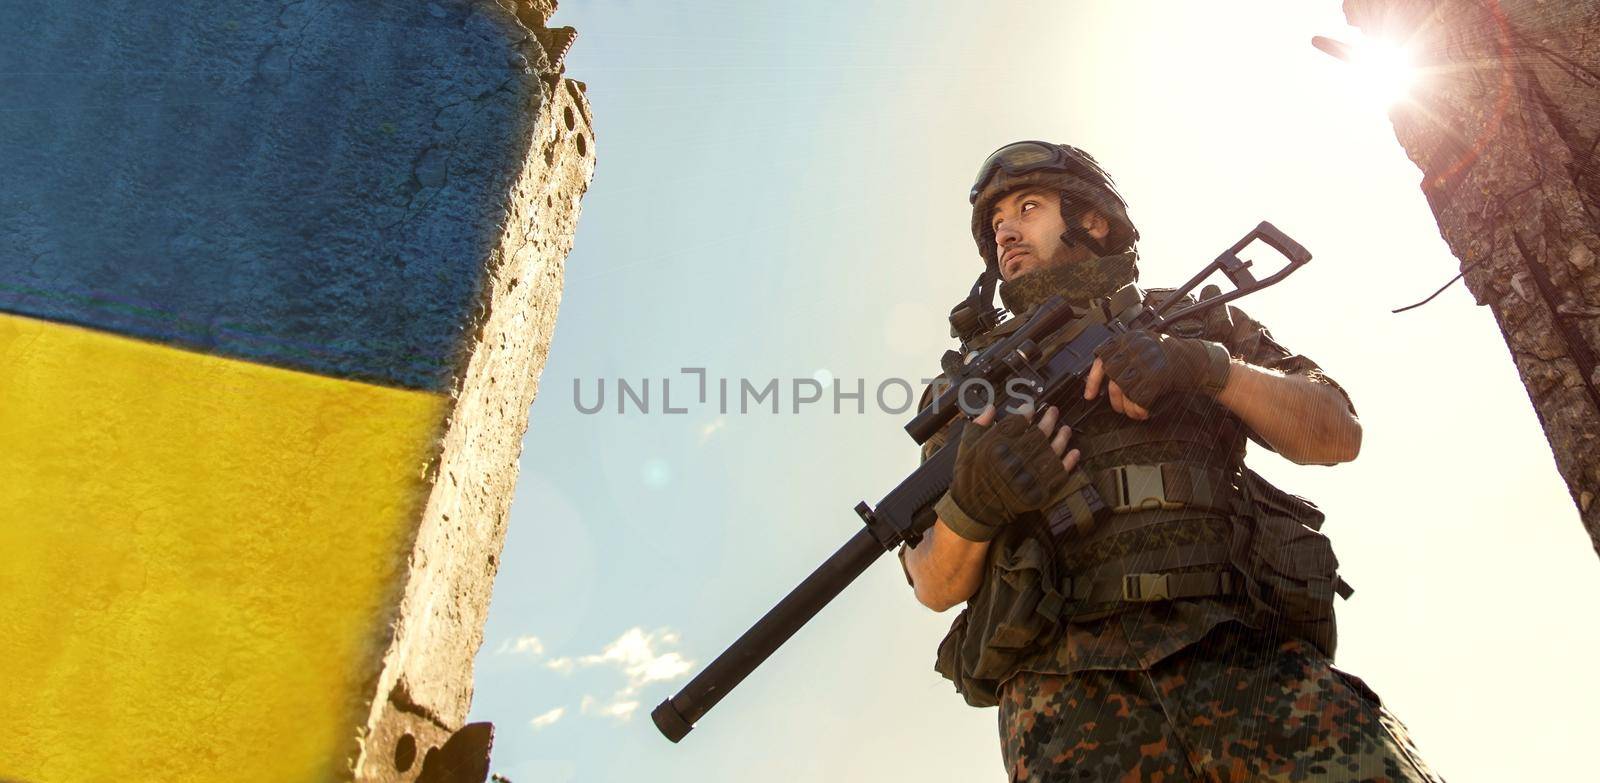 Ukrainian Soldier military in the war with a weapon in his hands. The flag of Ukraine is painted on a brick wall. Relations between Ukraine and Russia.